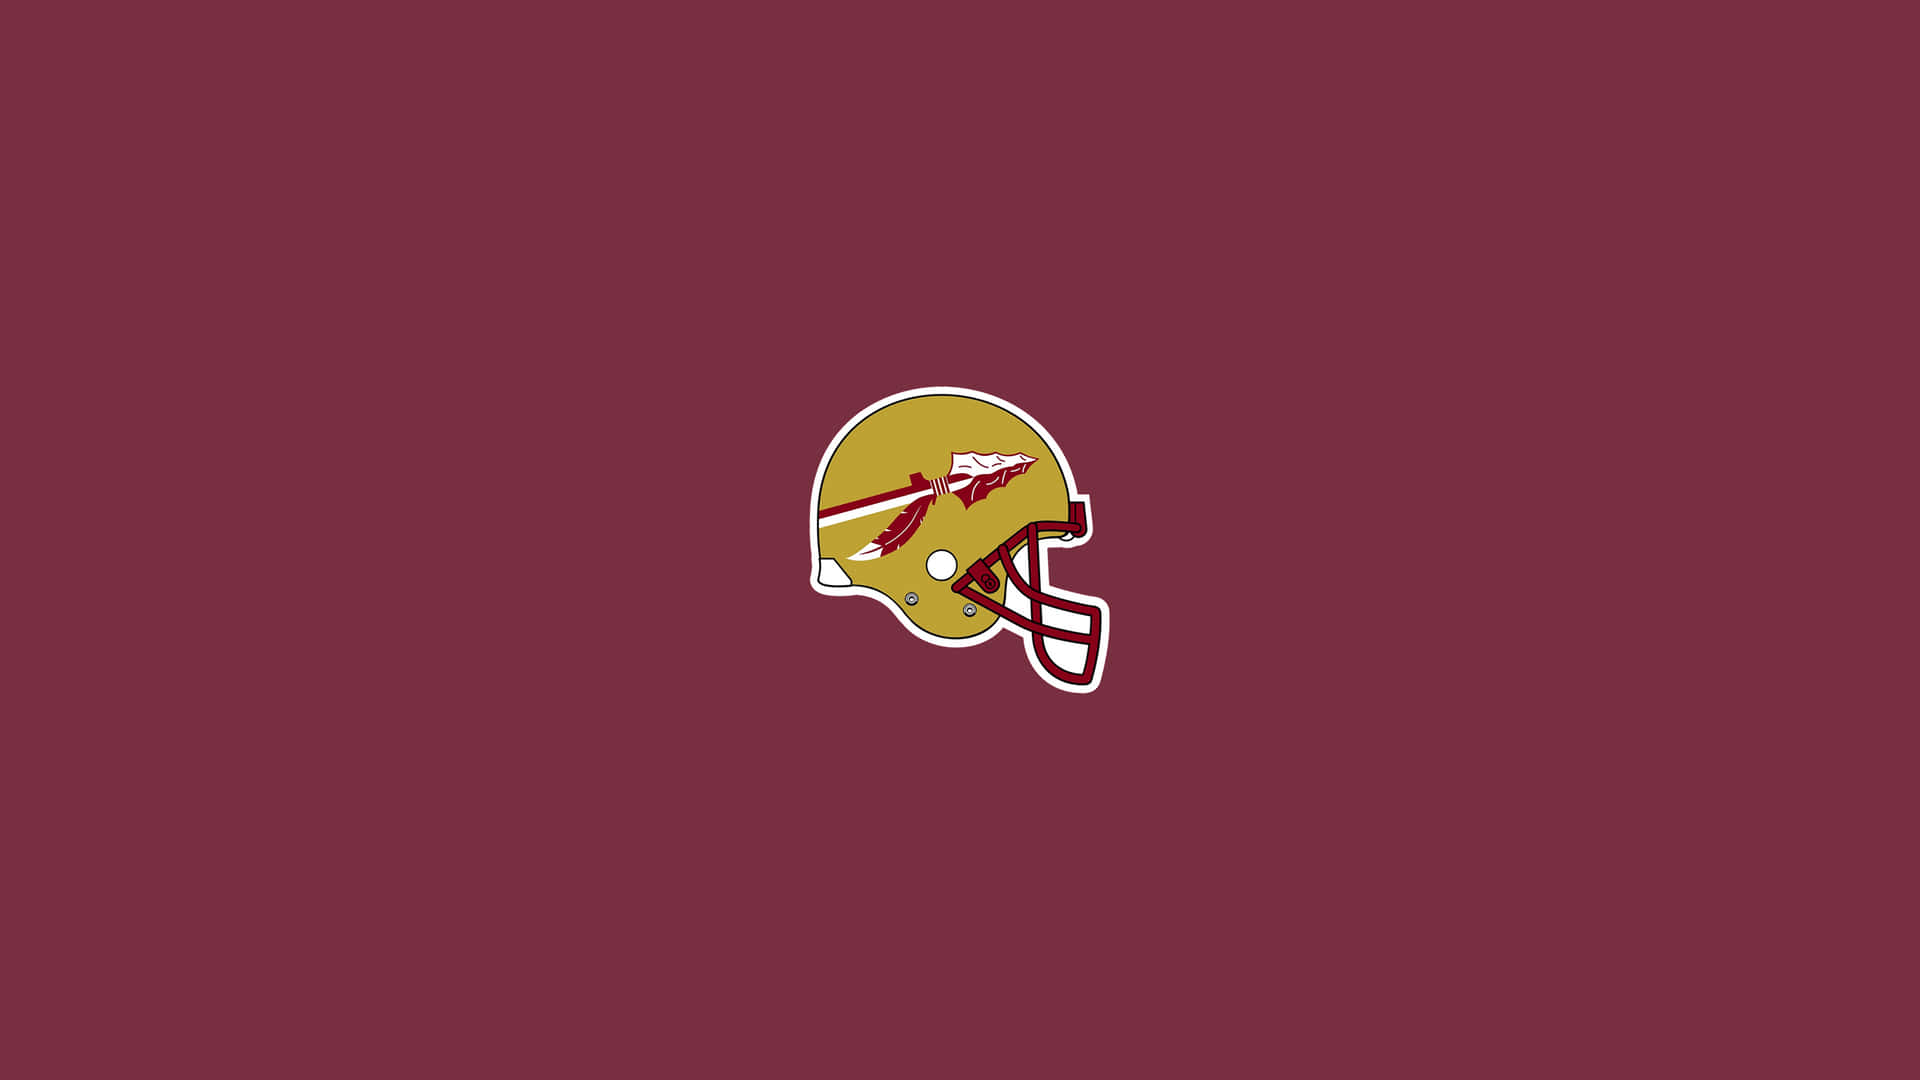 Free FSU Seminoles iPhone Wallpapers Install in seconds 21 to choose from  for every model   Florida state seminoles logo Fsu seminoles Florida  state football